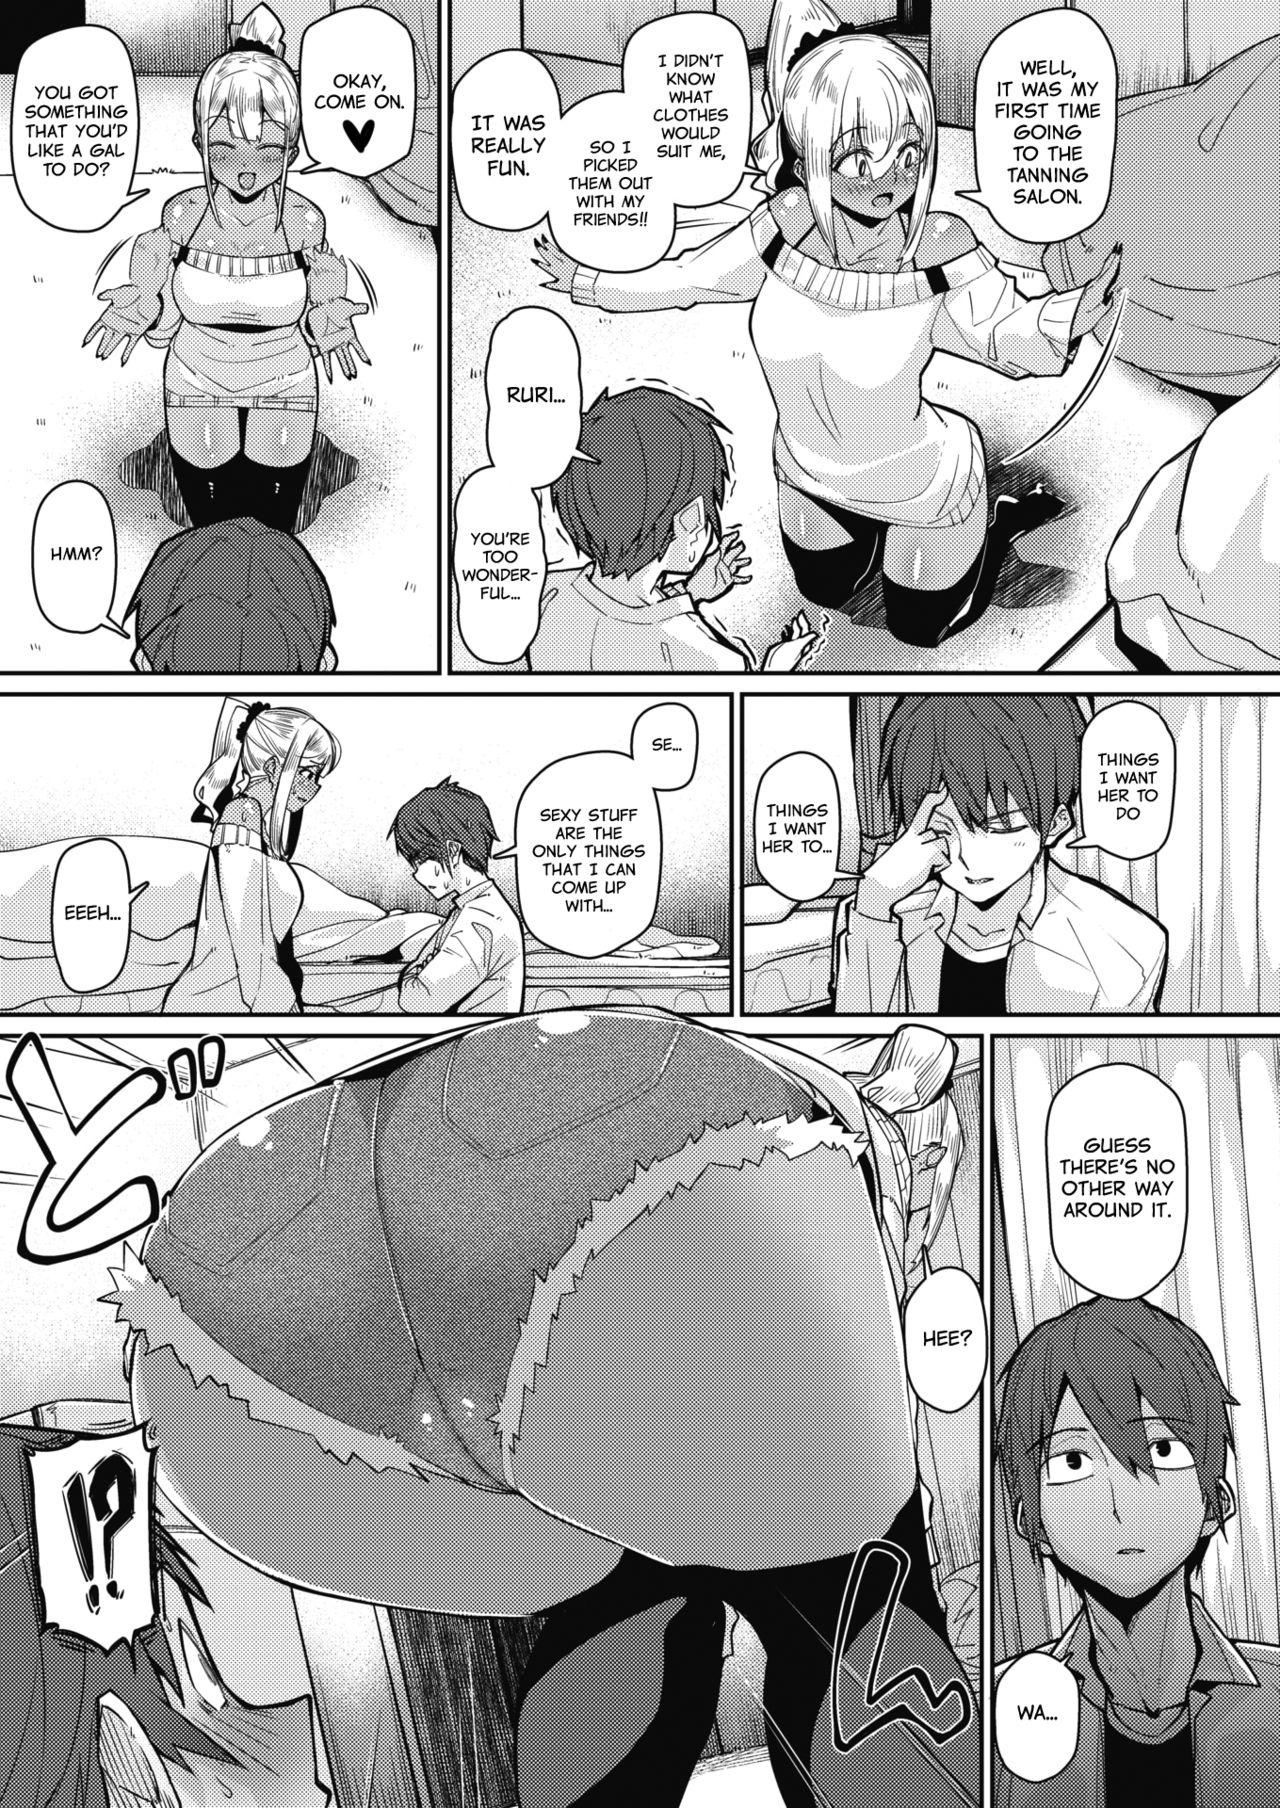 Trans Gekkan "The Bitch" o Mita Onna no Hannou ni Tsuite | About the Reaction of the Girl Who Saw "The Bitch Monthly" Rebolando - Page 5